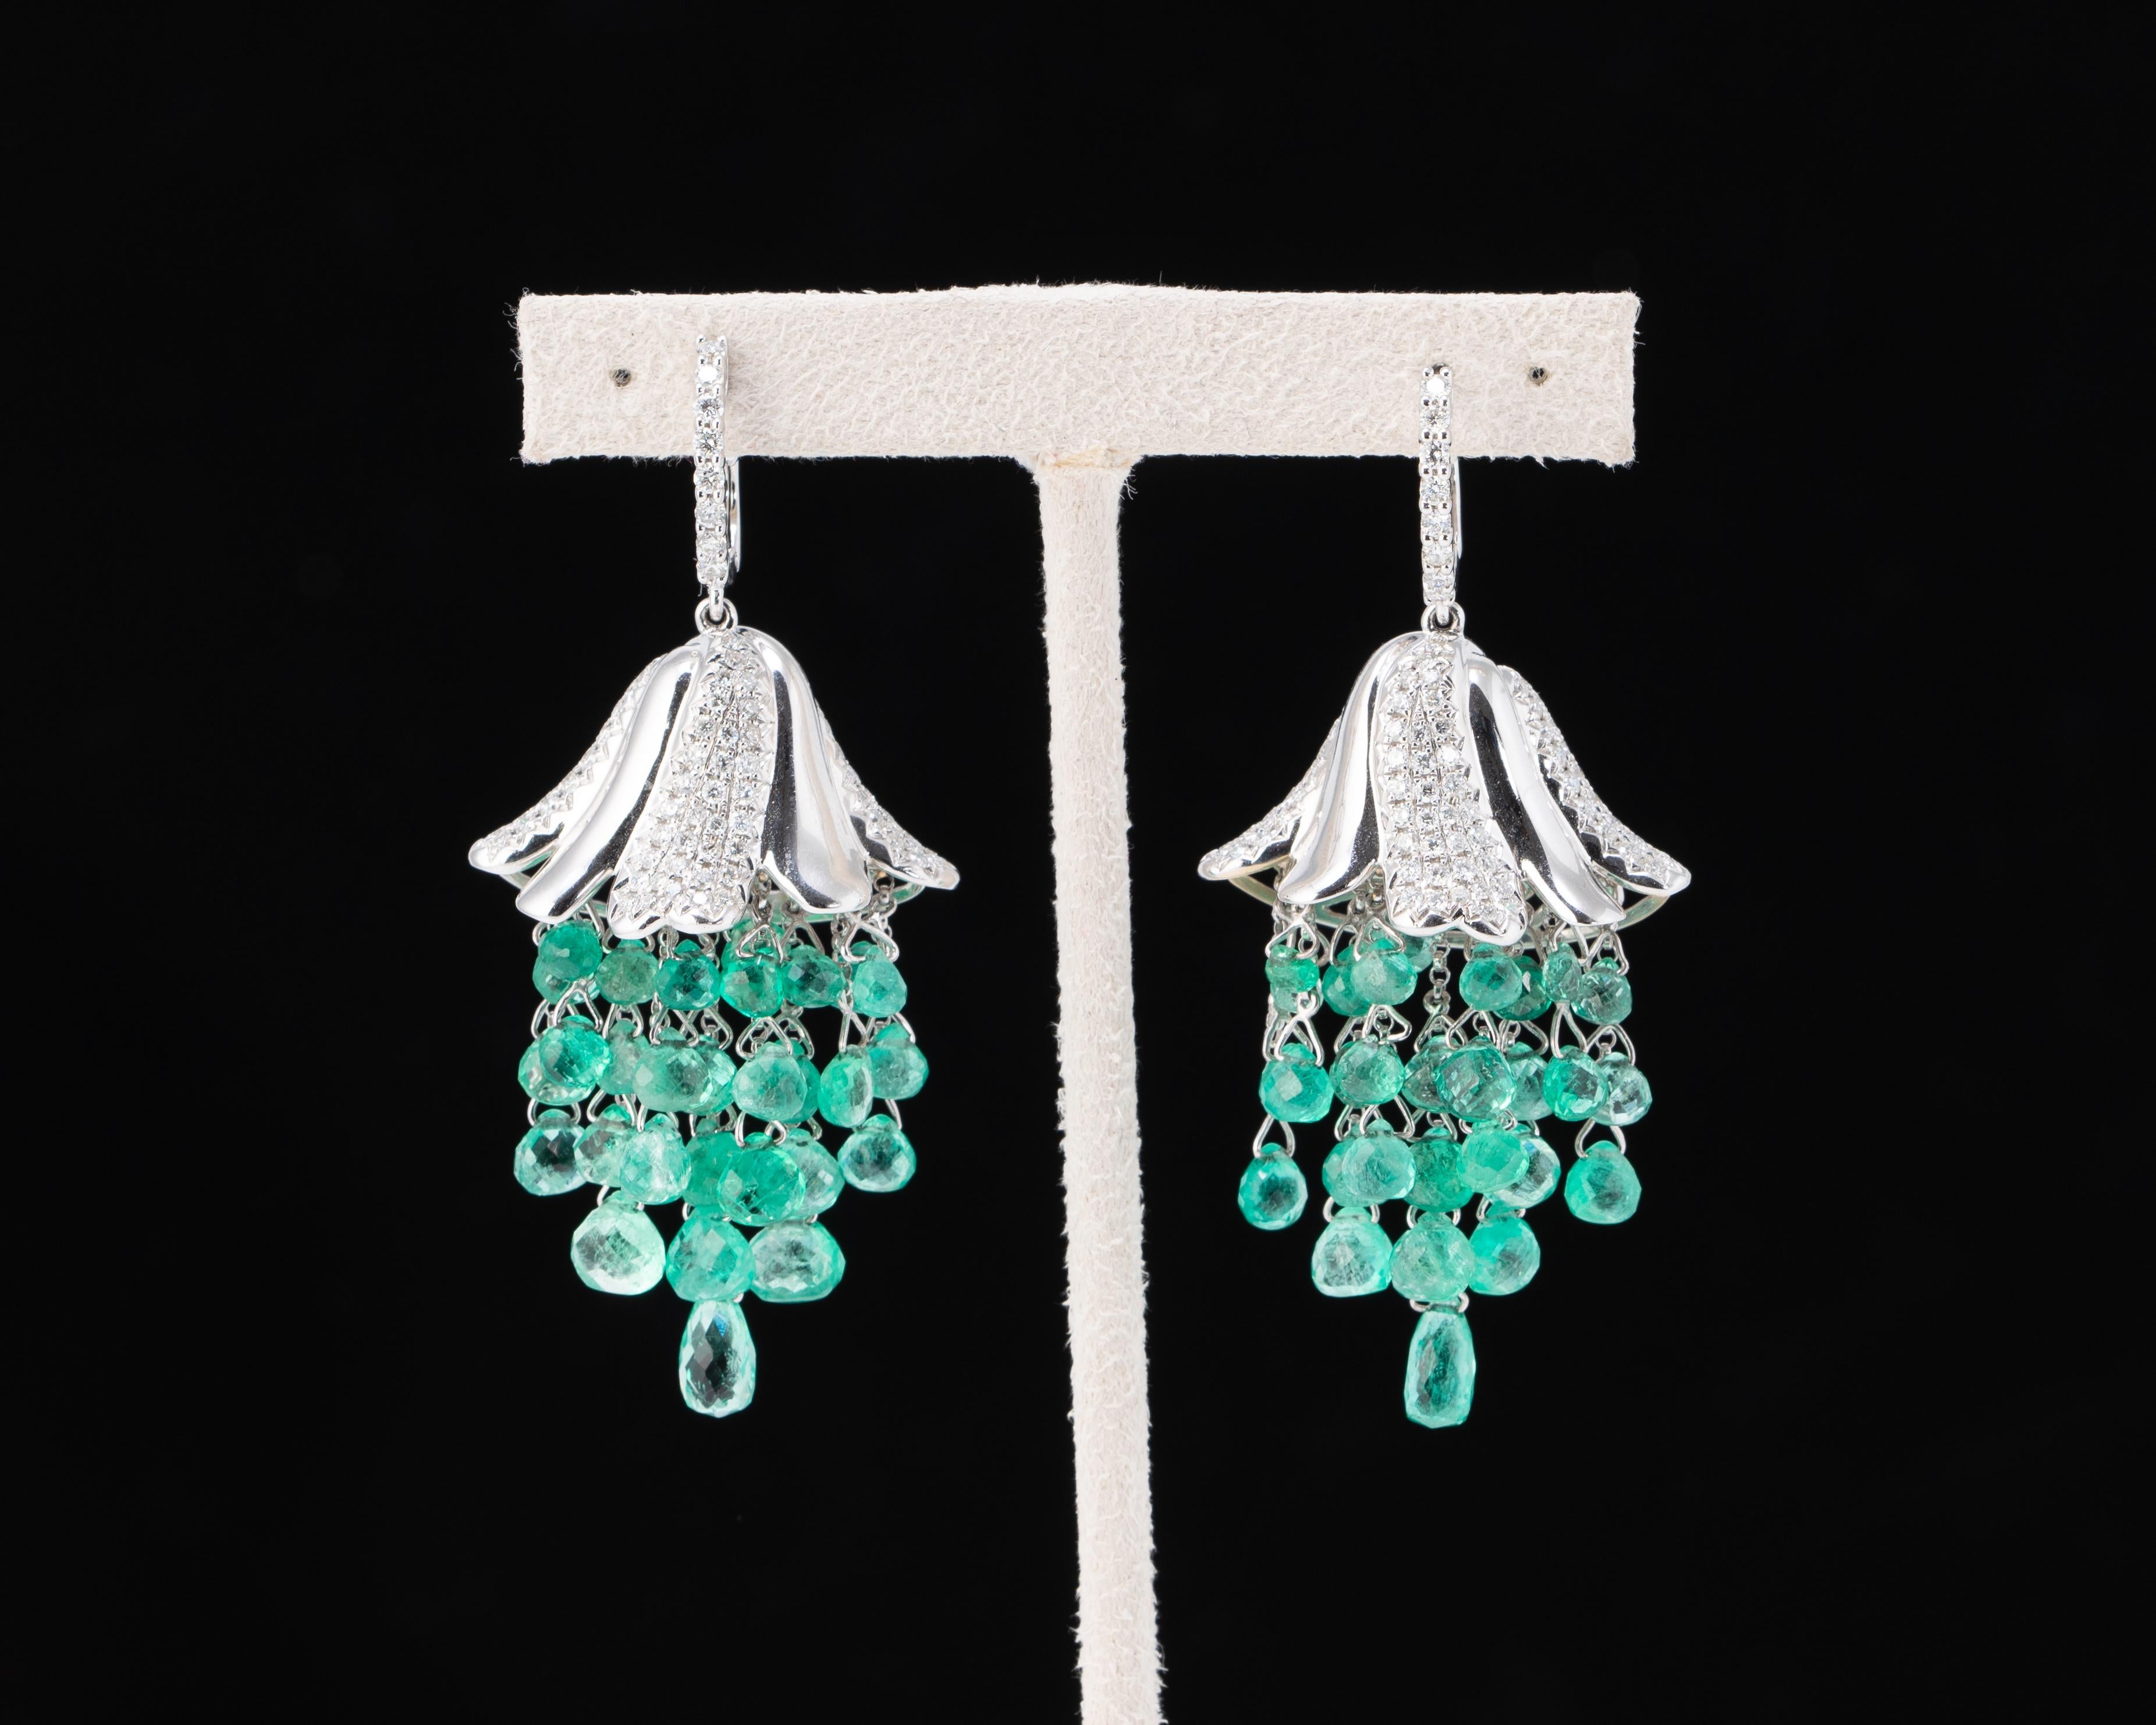 A very unique pair of 20.19 carat Colombian Emerald earrings, delicately dangling in Gold wire, from a White Diamond and 18K Gold cap. 1.47 carats of White Diamonds are used, and all stones are set in 17.43 grams of 18K White Gold. 
Free shipping